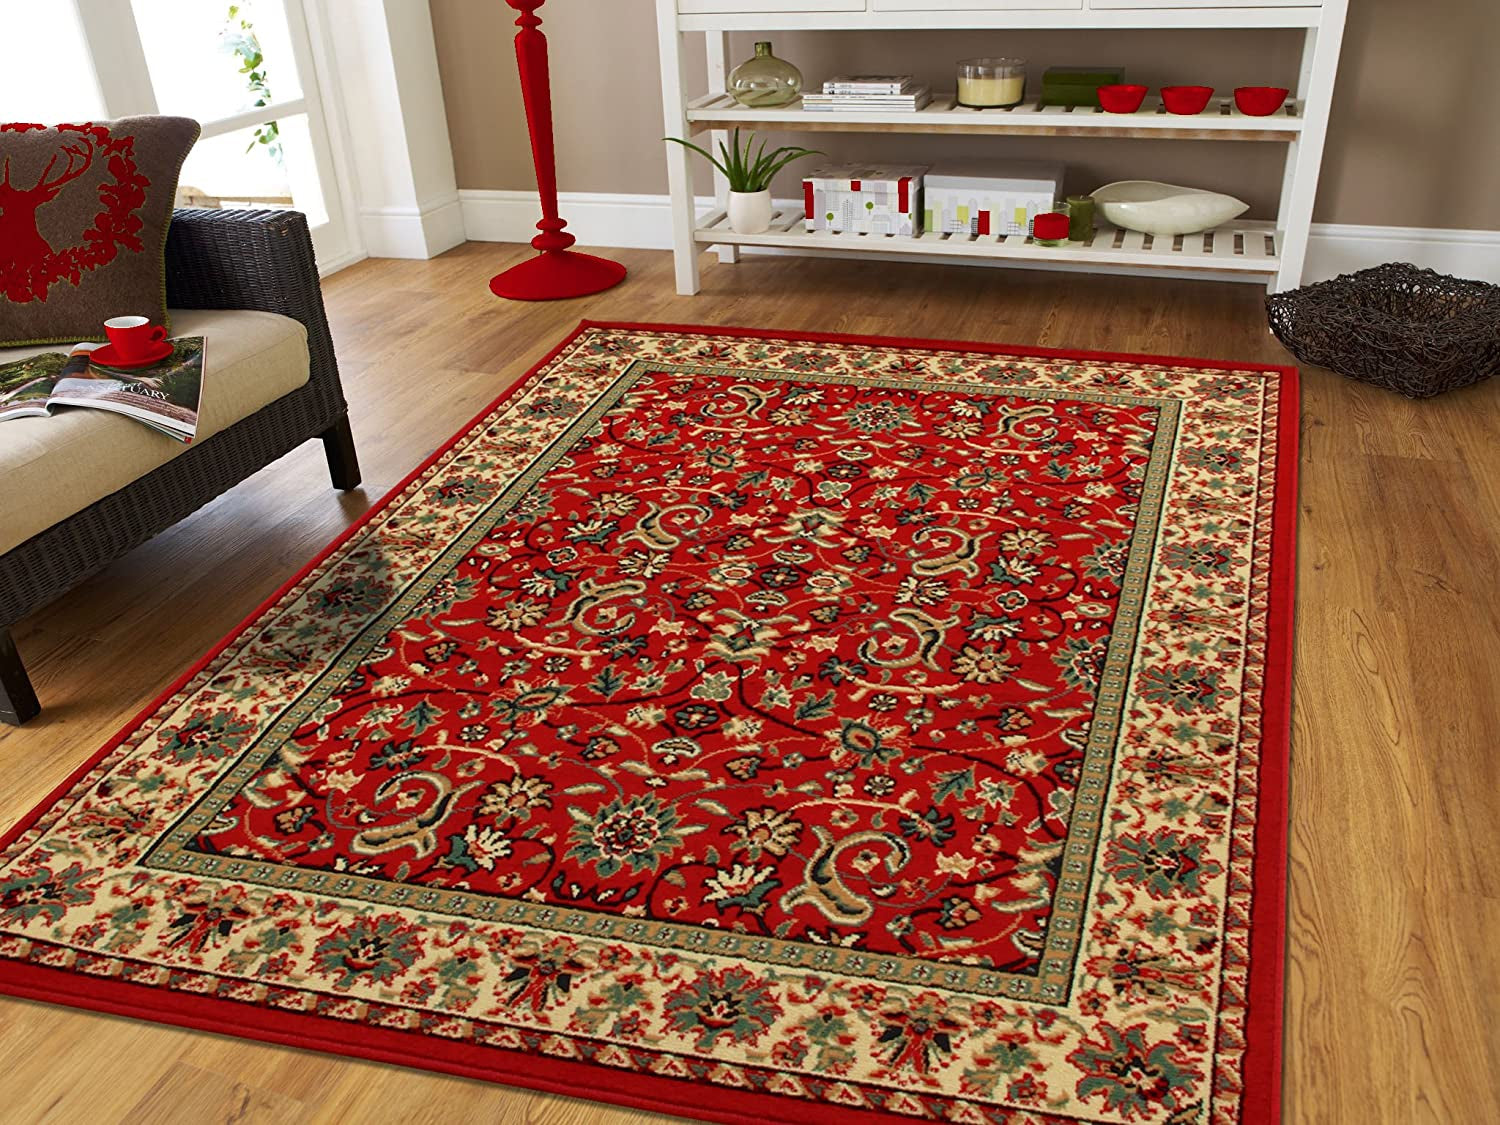 Red Persian Rugs for Living Room 5X8 Red Rugs for Bedroom & Office Rug Reds Green, Cream, Black Area Rugs 5X7 Clearance under 50